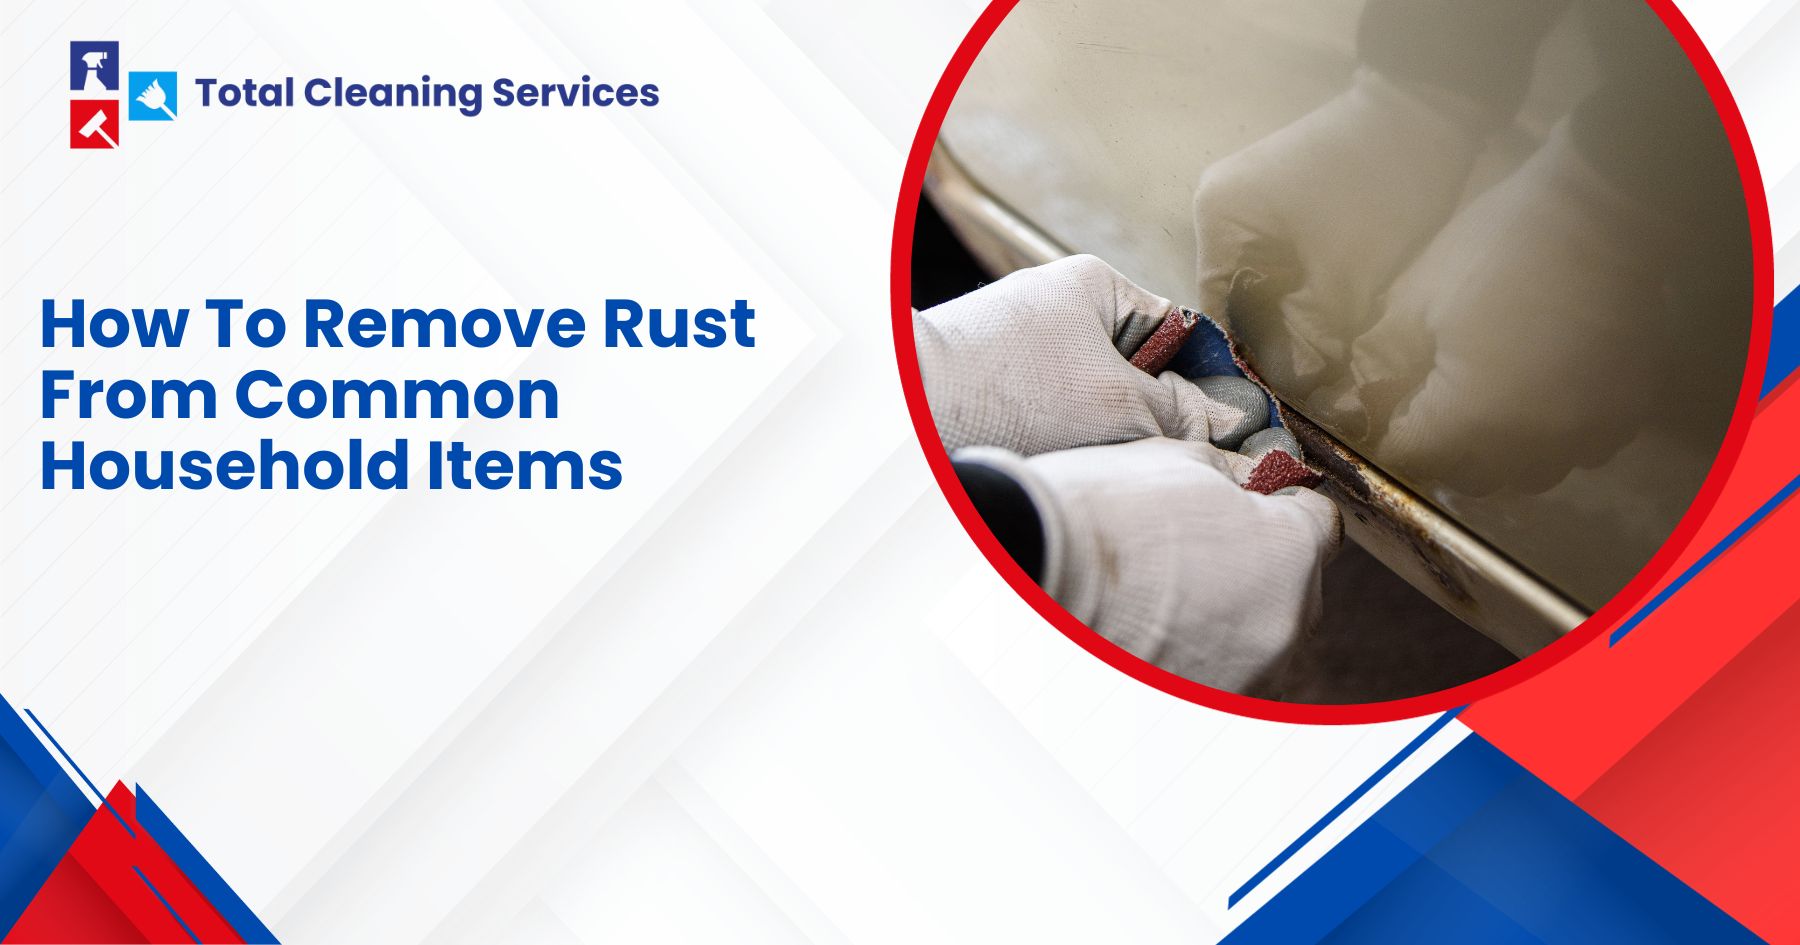 How To Remove Rust From Common Household Items